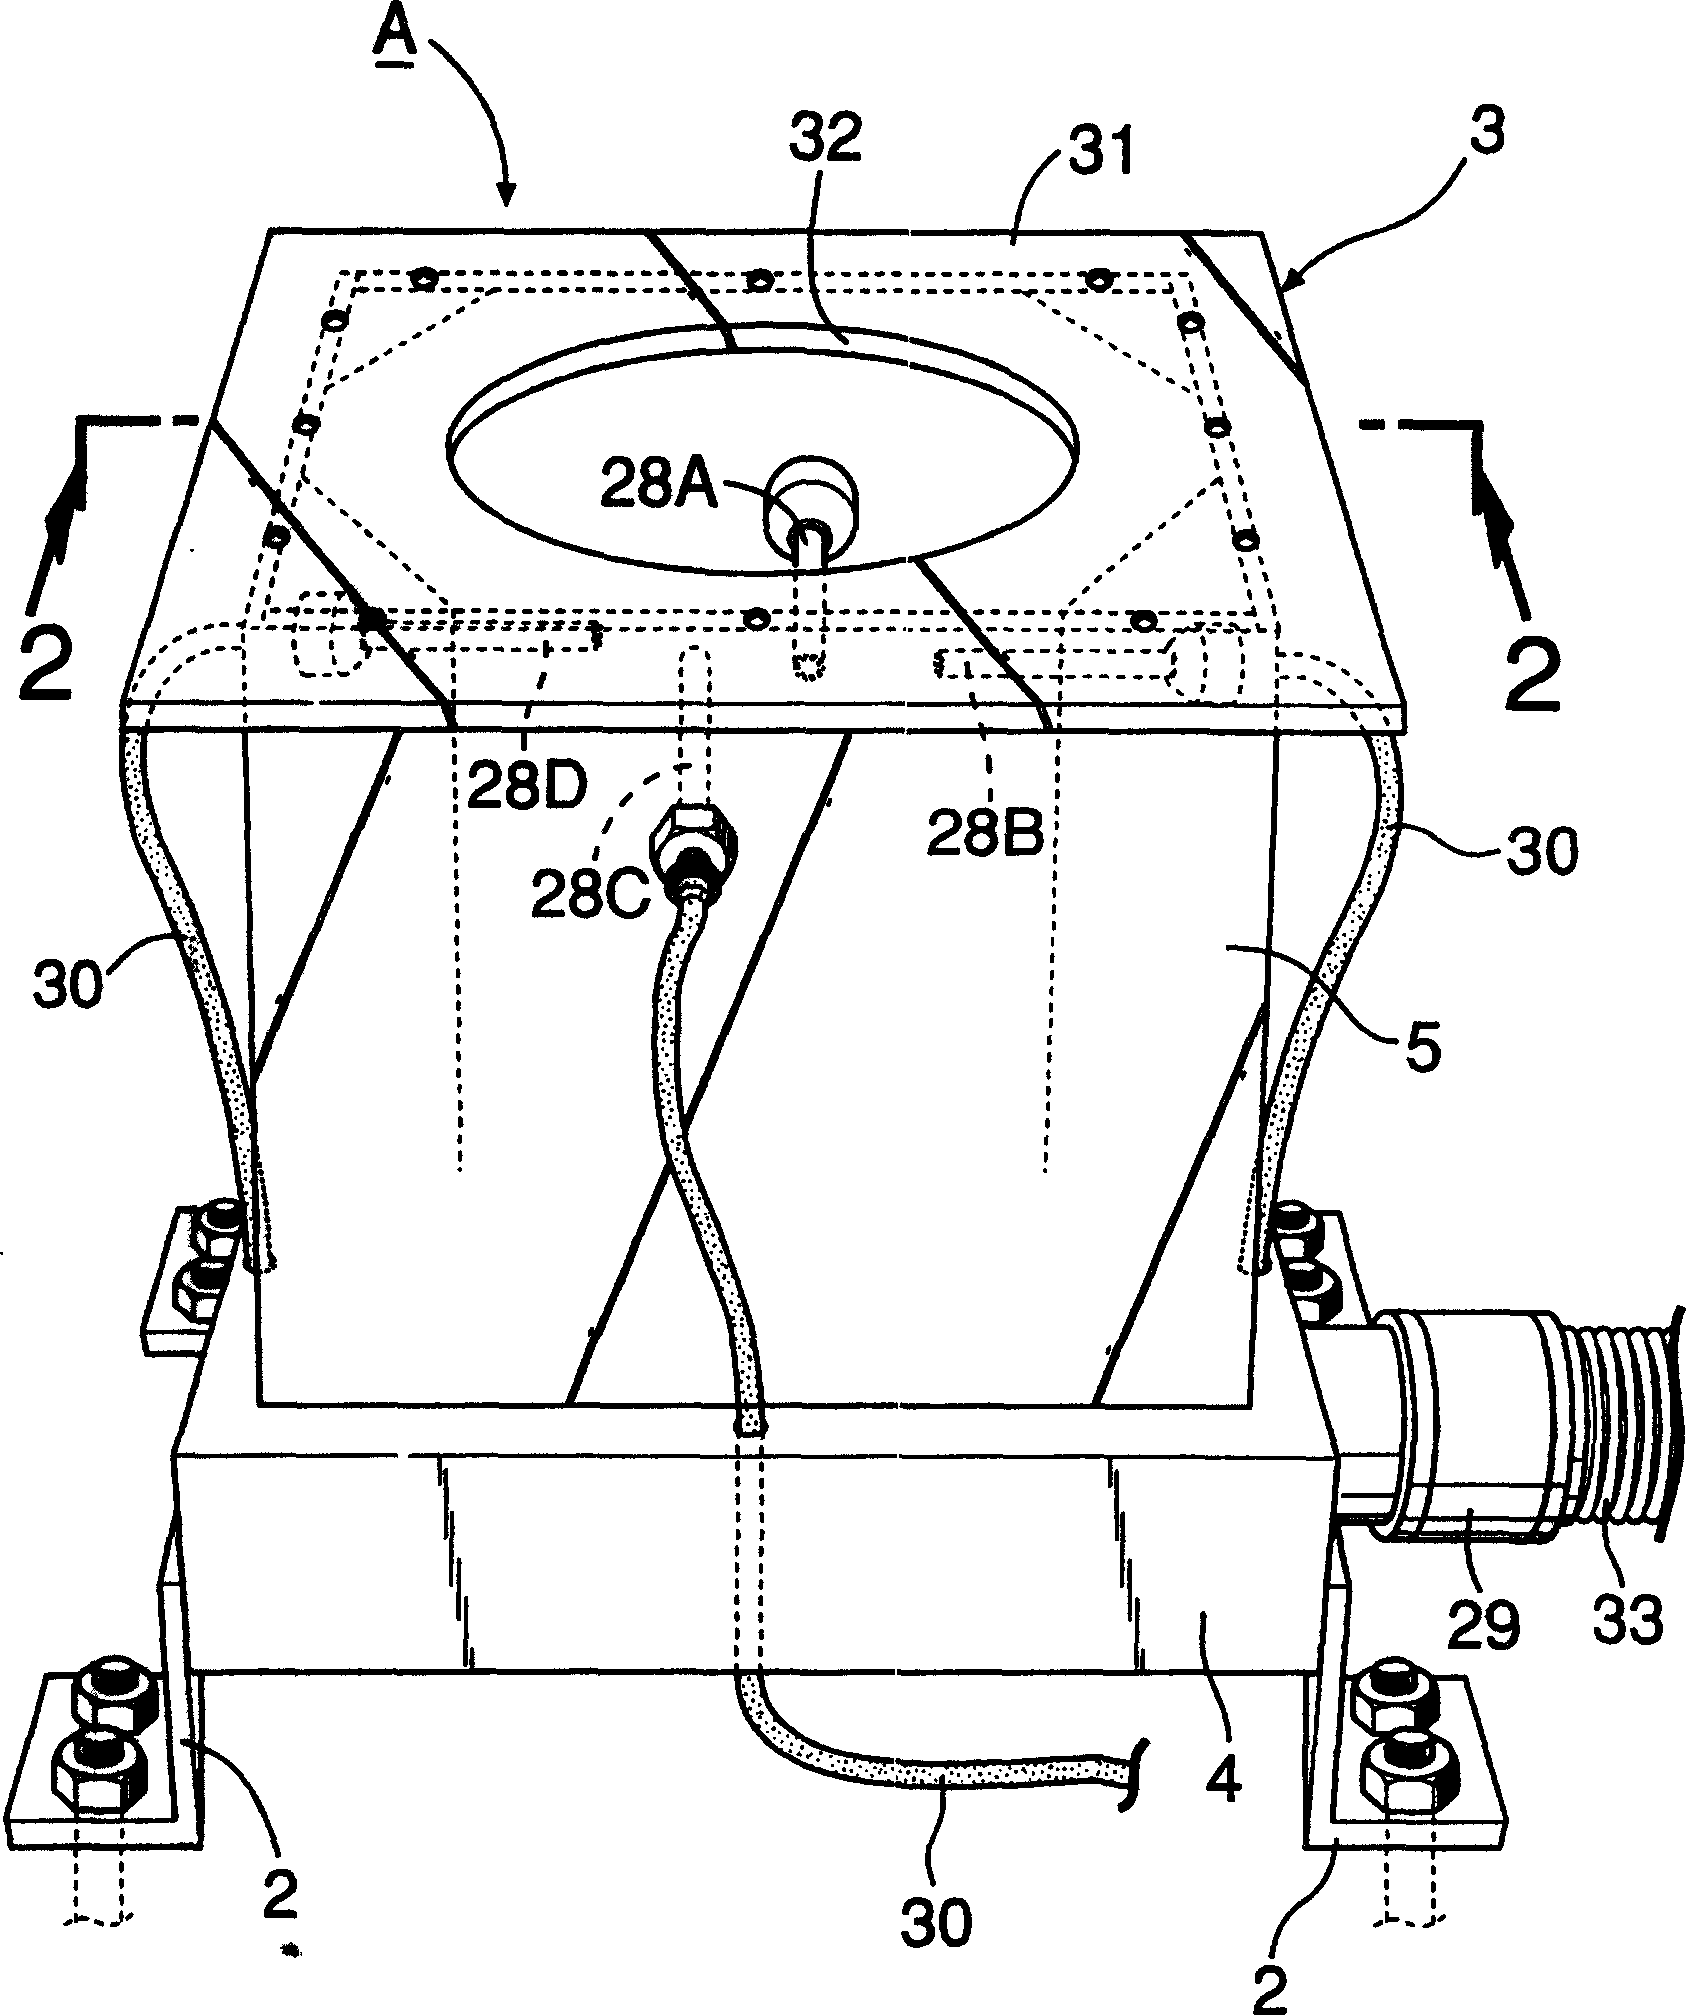 Air blowing cleaning apparatus